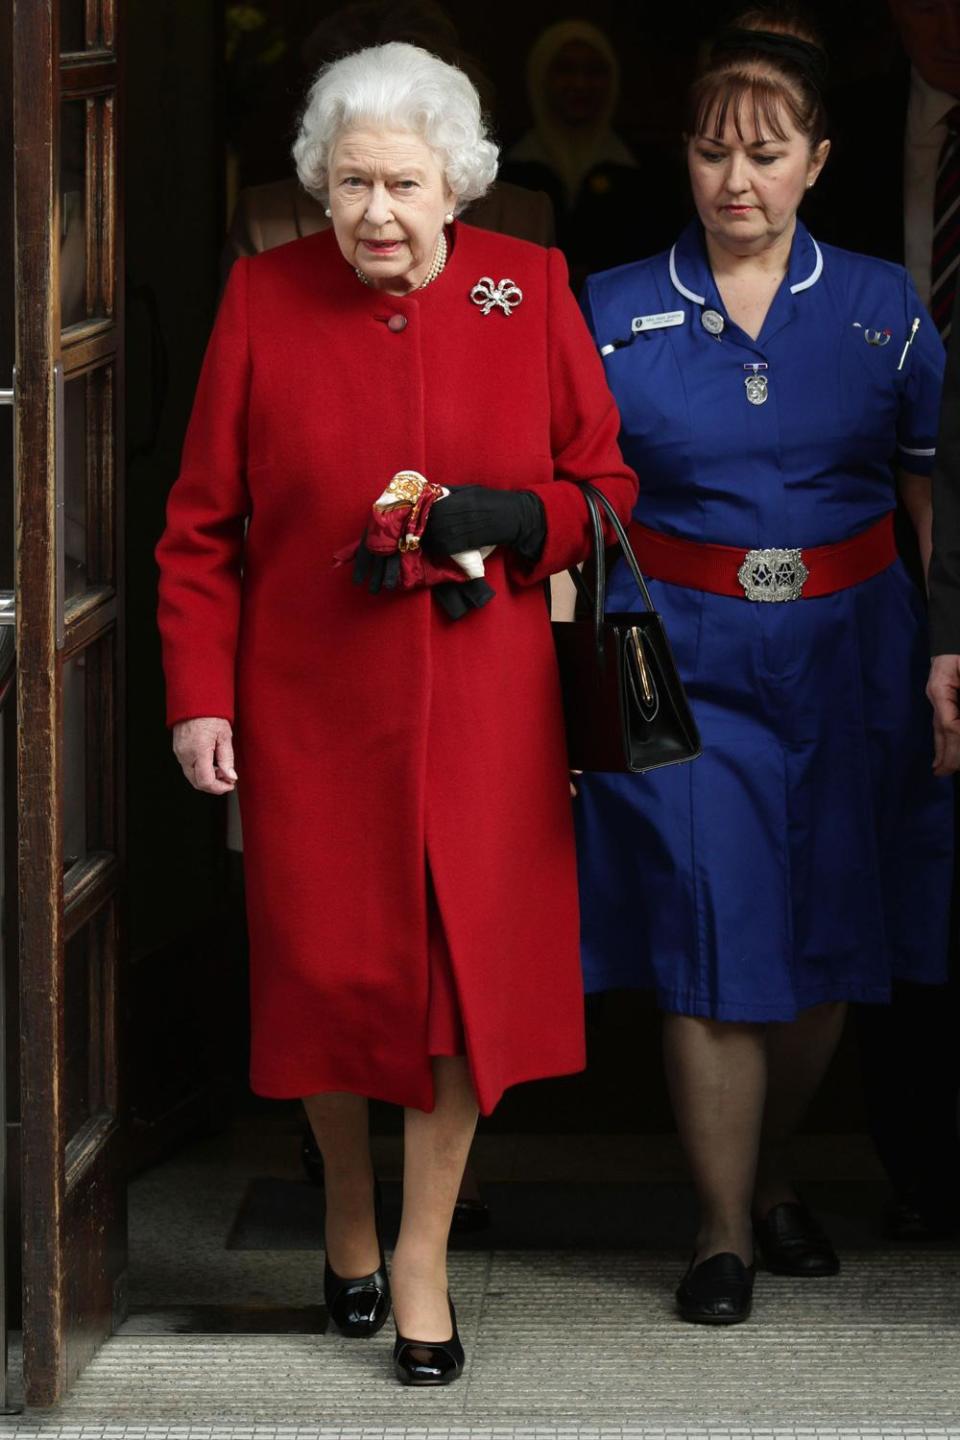 Queen Elizabeth II leaving King Edward VII Hospital after being treated there in 2013 (PA)